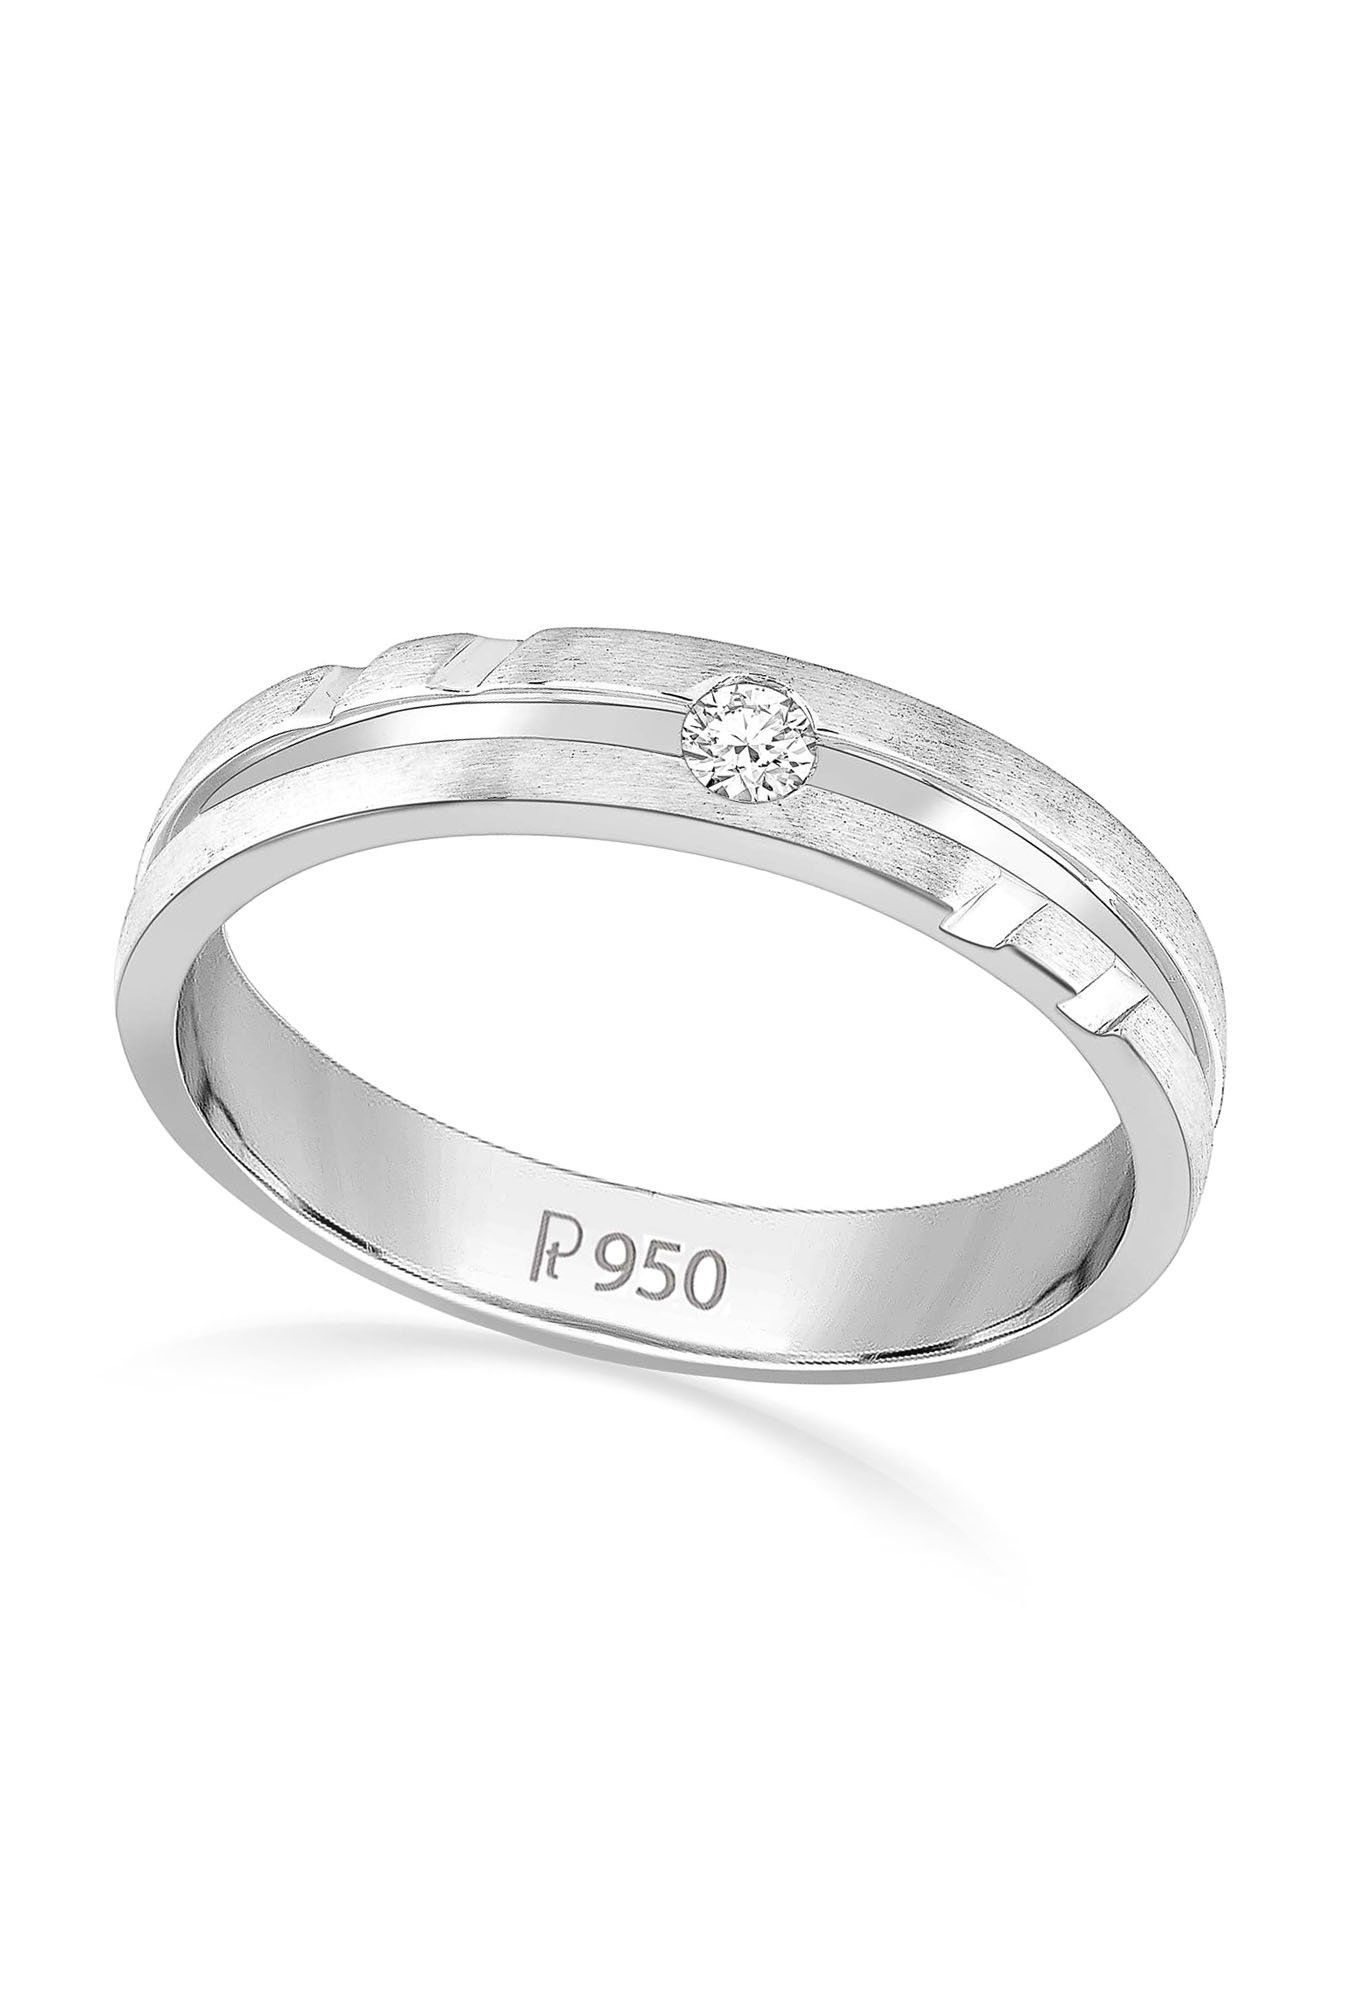 Gualiy Wedding Ring Set Sterling Silver, Couple Personalized Rings Heart  Ring with Cubic Zirconia Ring | Amazon.com